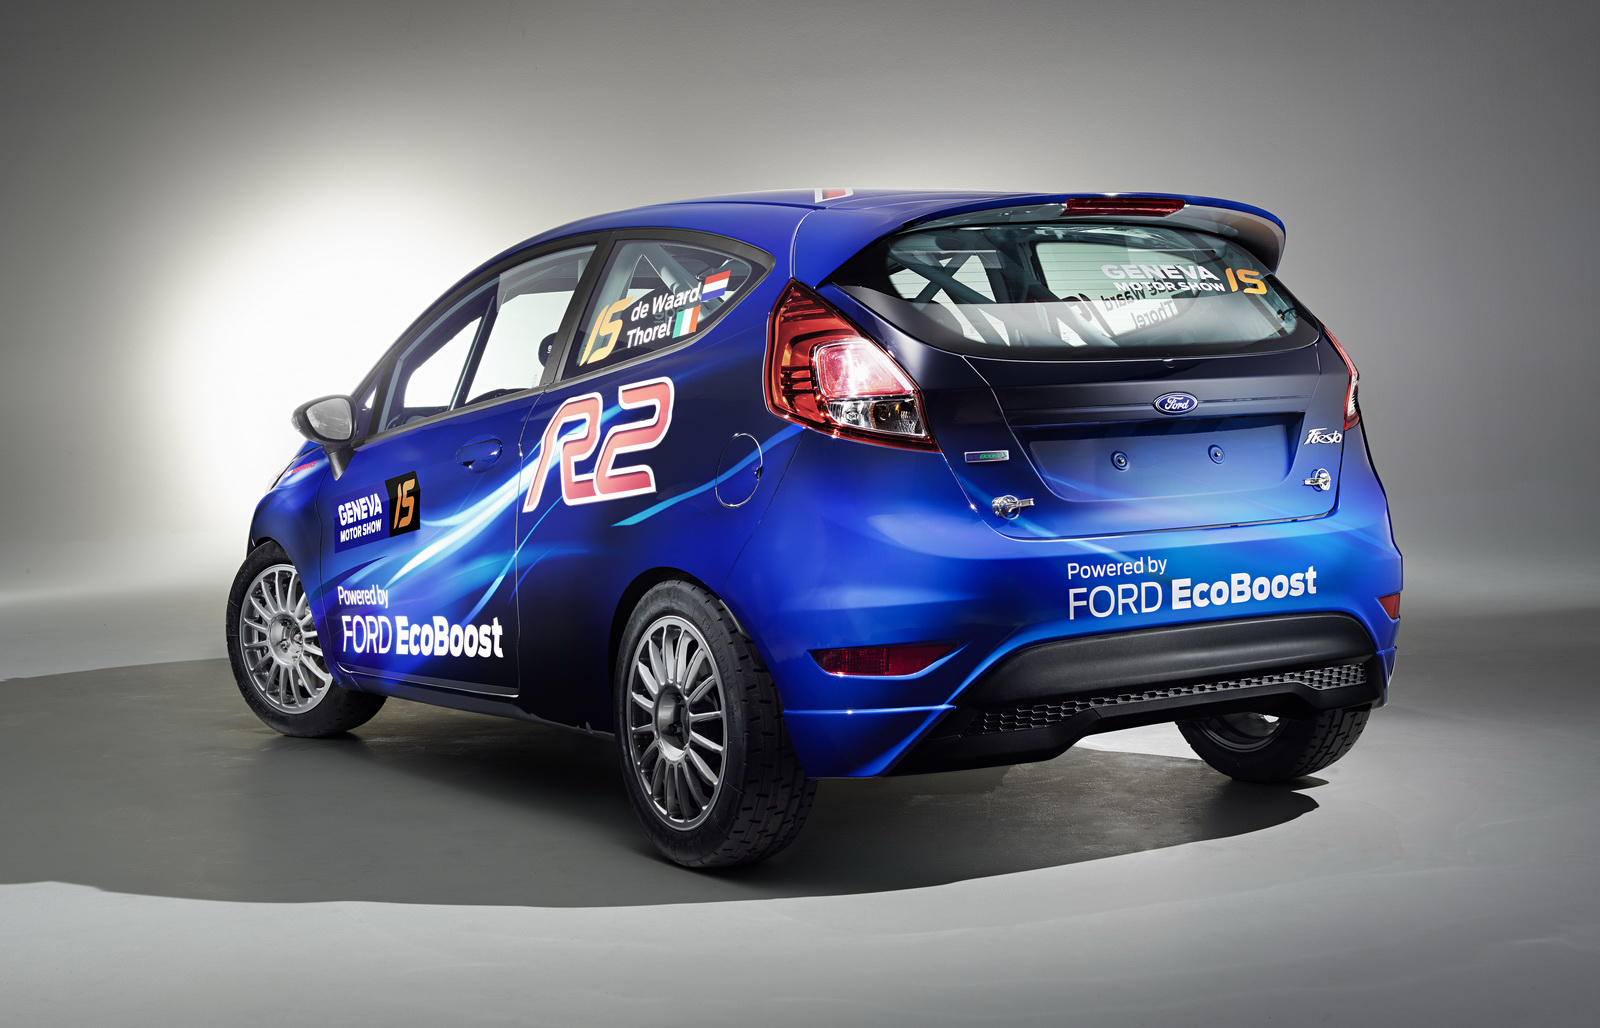 Ford Fiesta R2 Rally Car Gets a PS 1.0L EcoBoost Engine   Carscoops